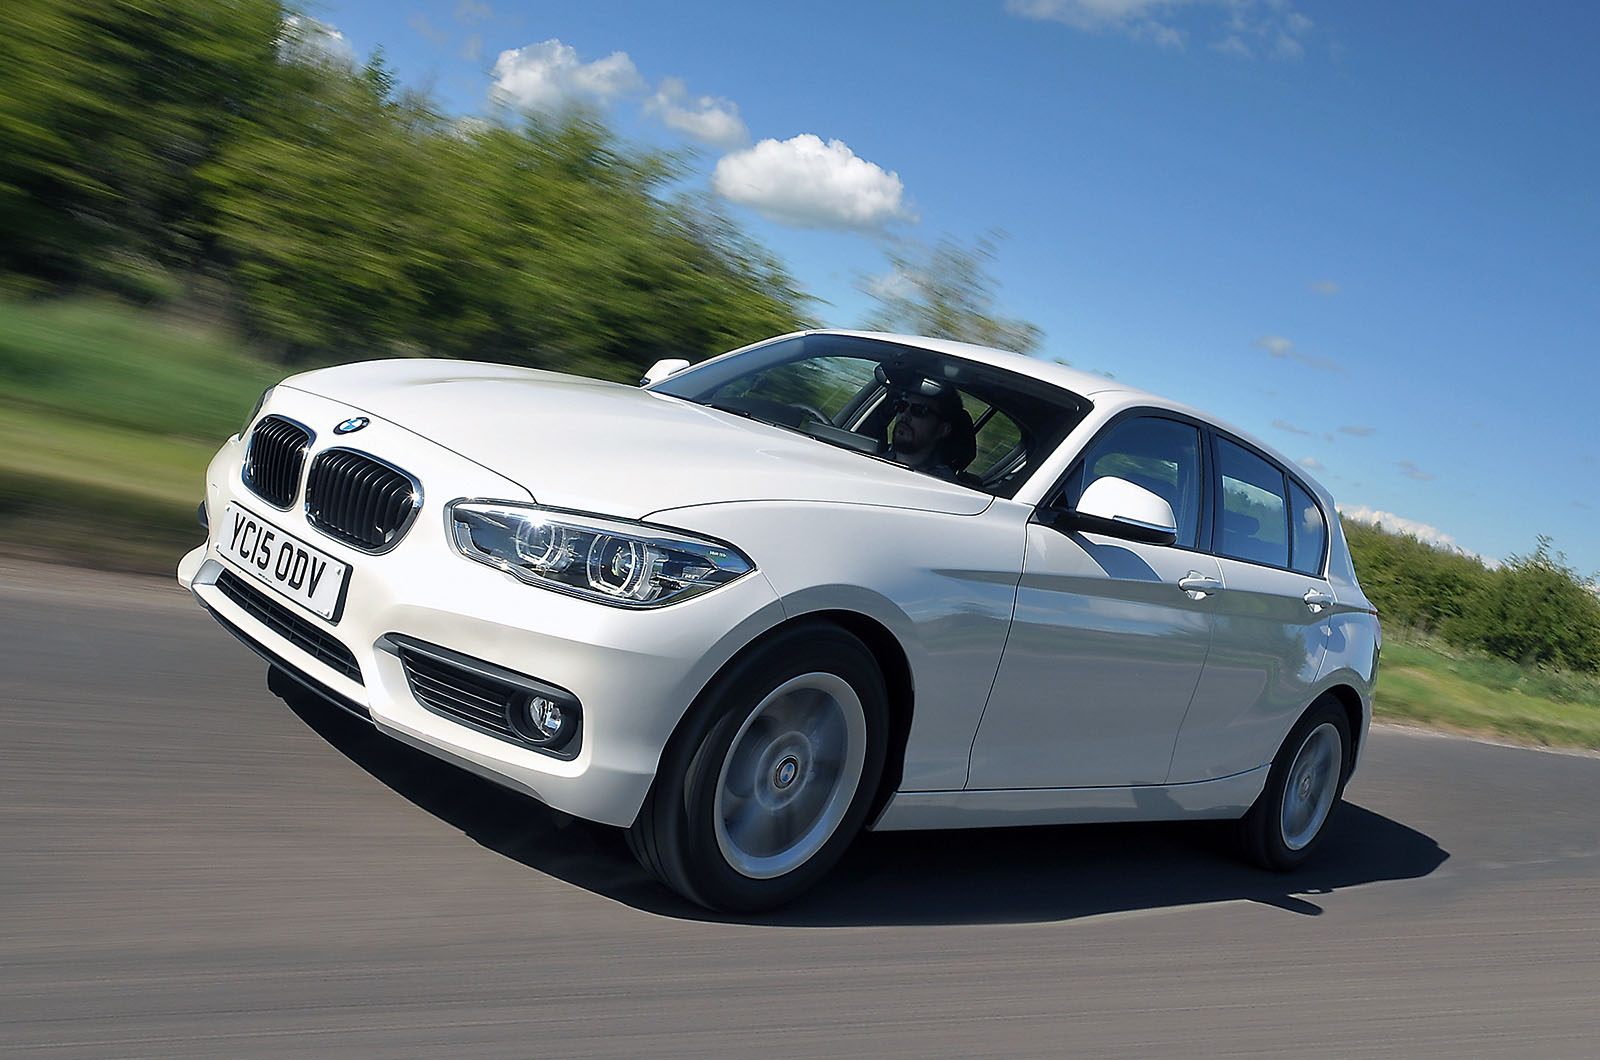 All BMW 1 Series Models by Year (2004-Present) - Specs, Pictures